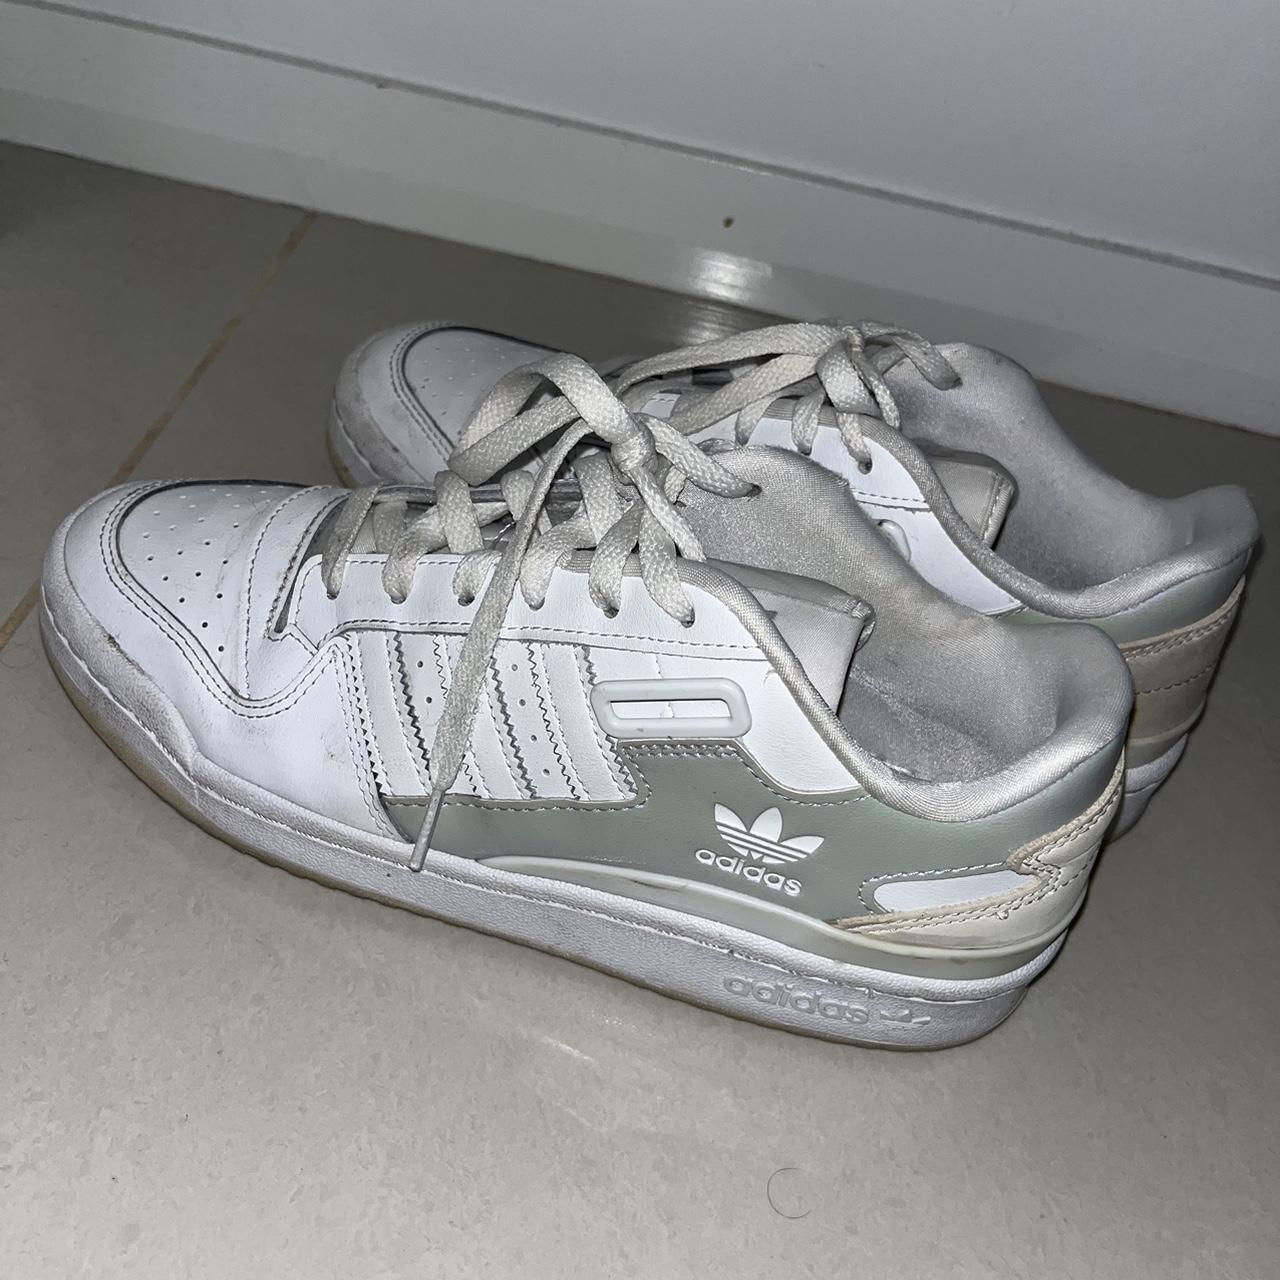 adidas Originals Forum Low sneakers in white and... - Depop